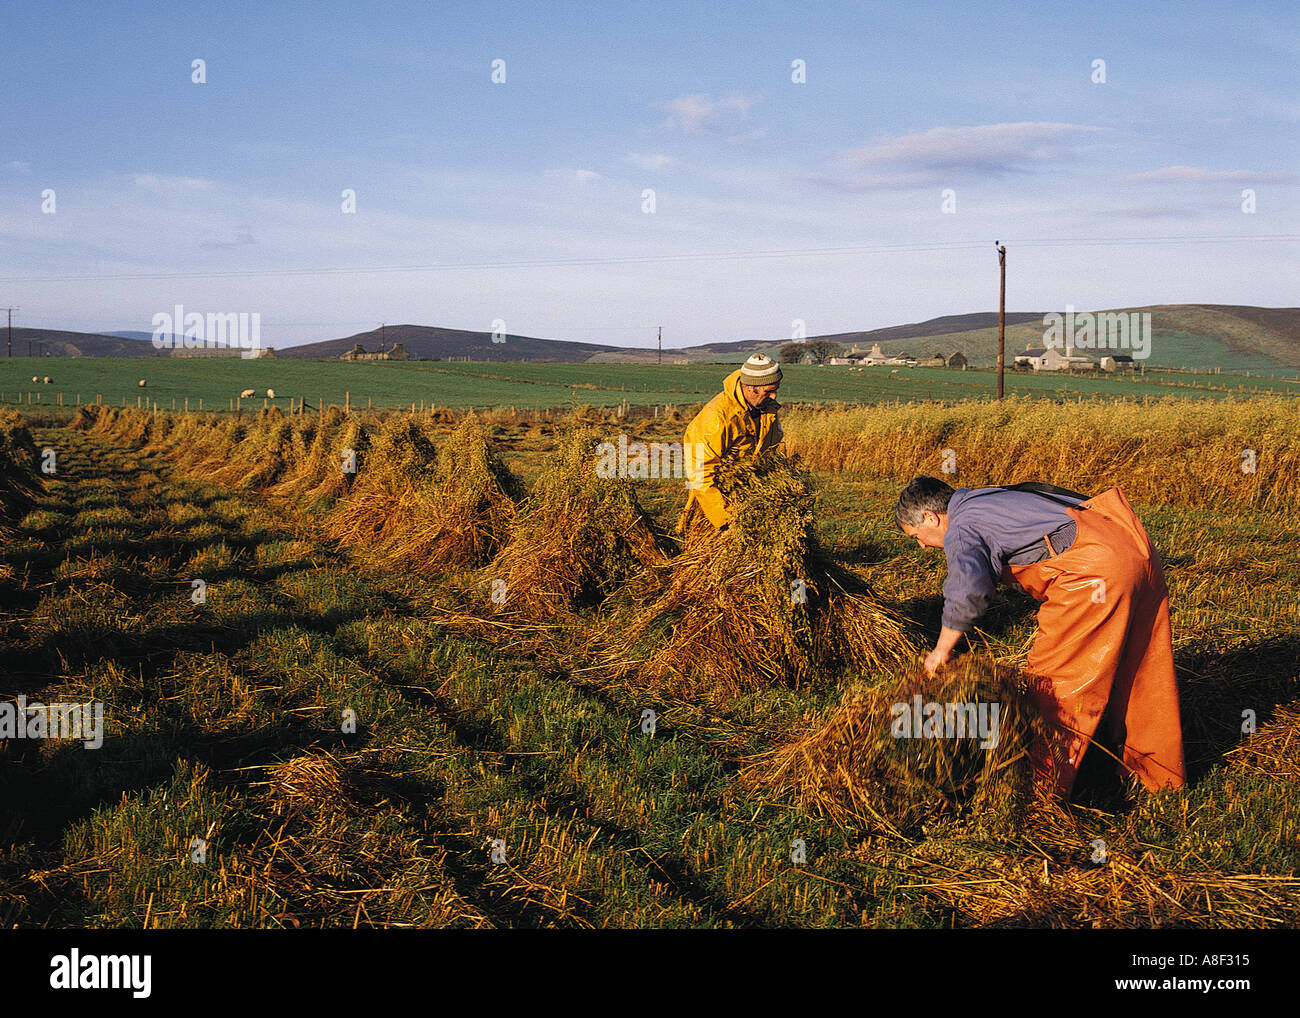 dh Hay stacking sheaves HARVESTING UK Traditional Orkney farm workers in scotland farmer field harvest stack farmworkers scottish rural people Stock Photo